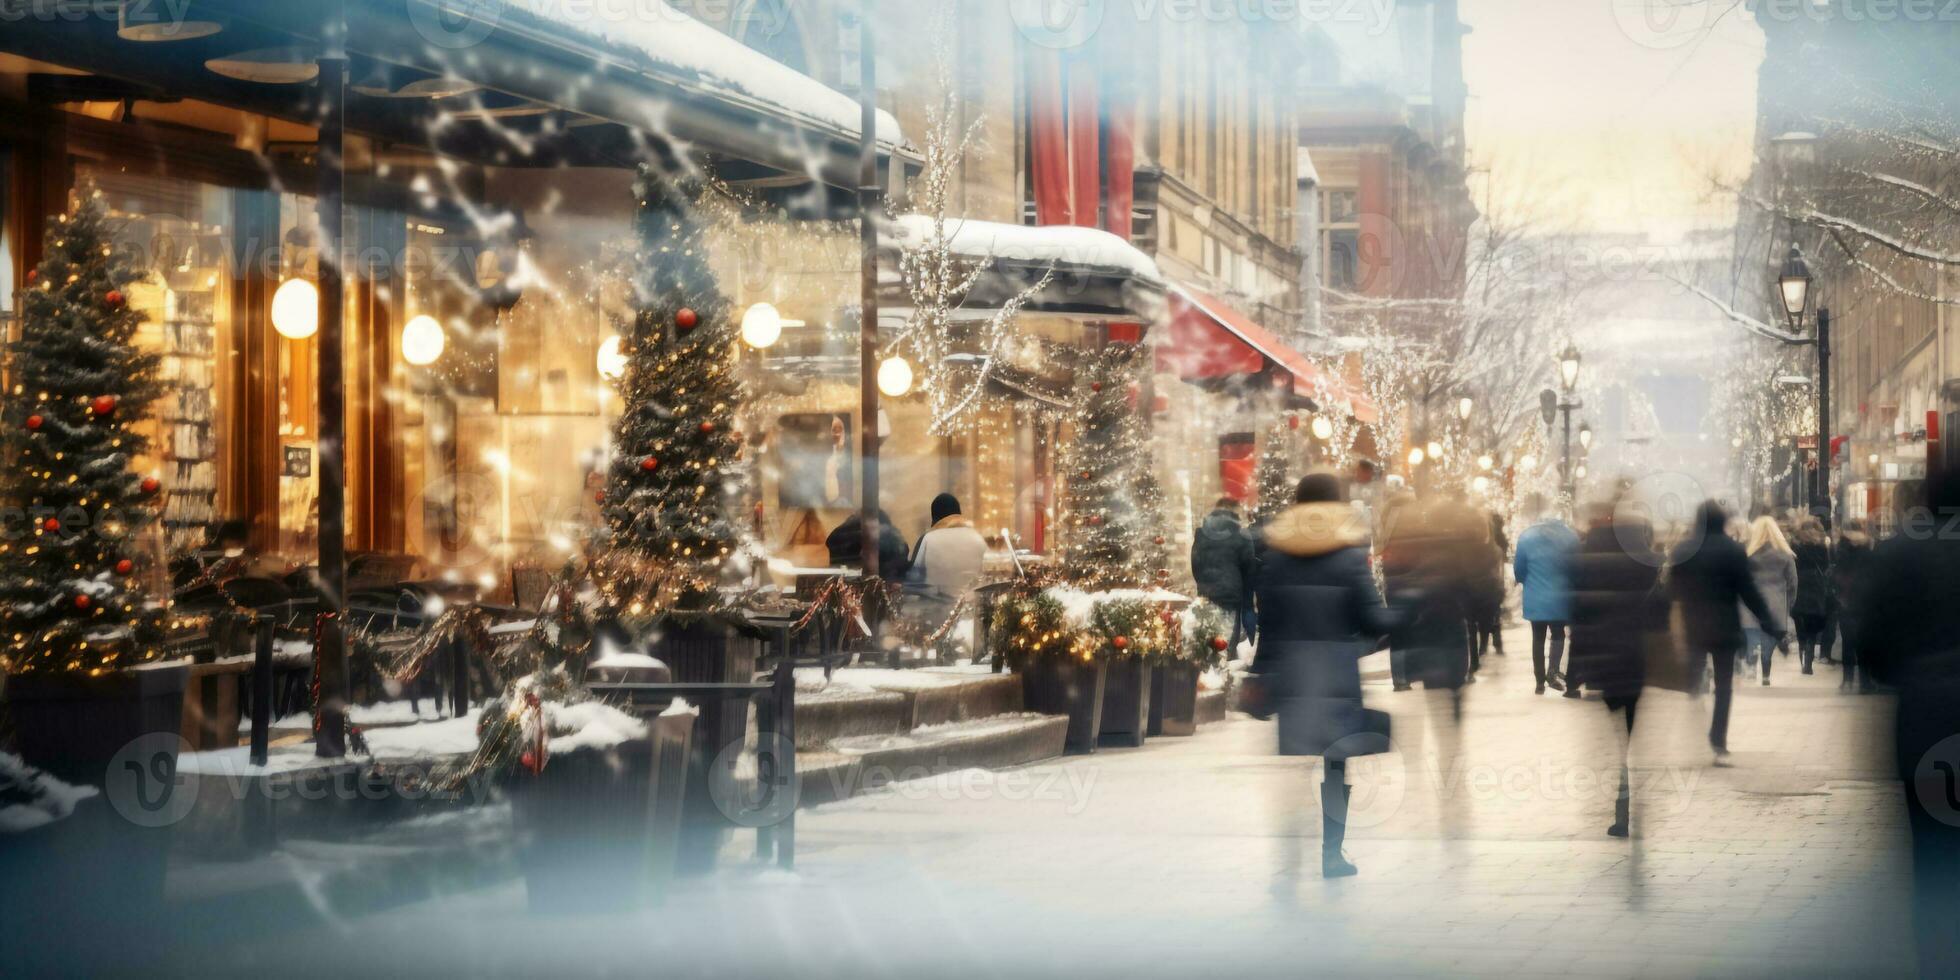 motion blurred street view and motion blurred prople walking along the street in winter season,winter Christmas market photo